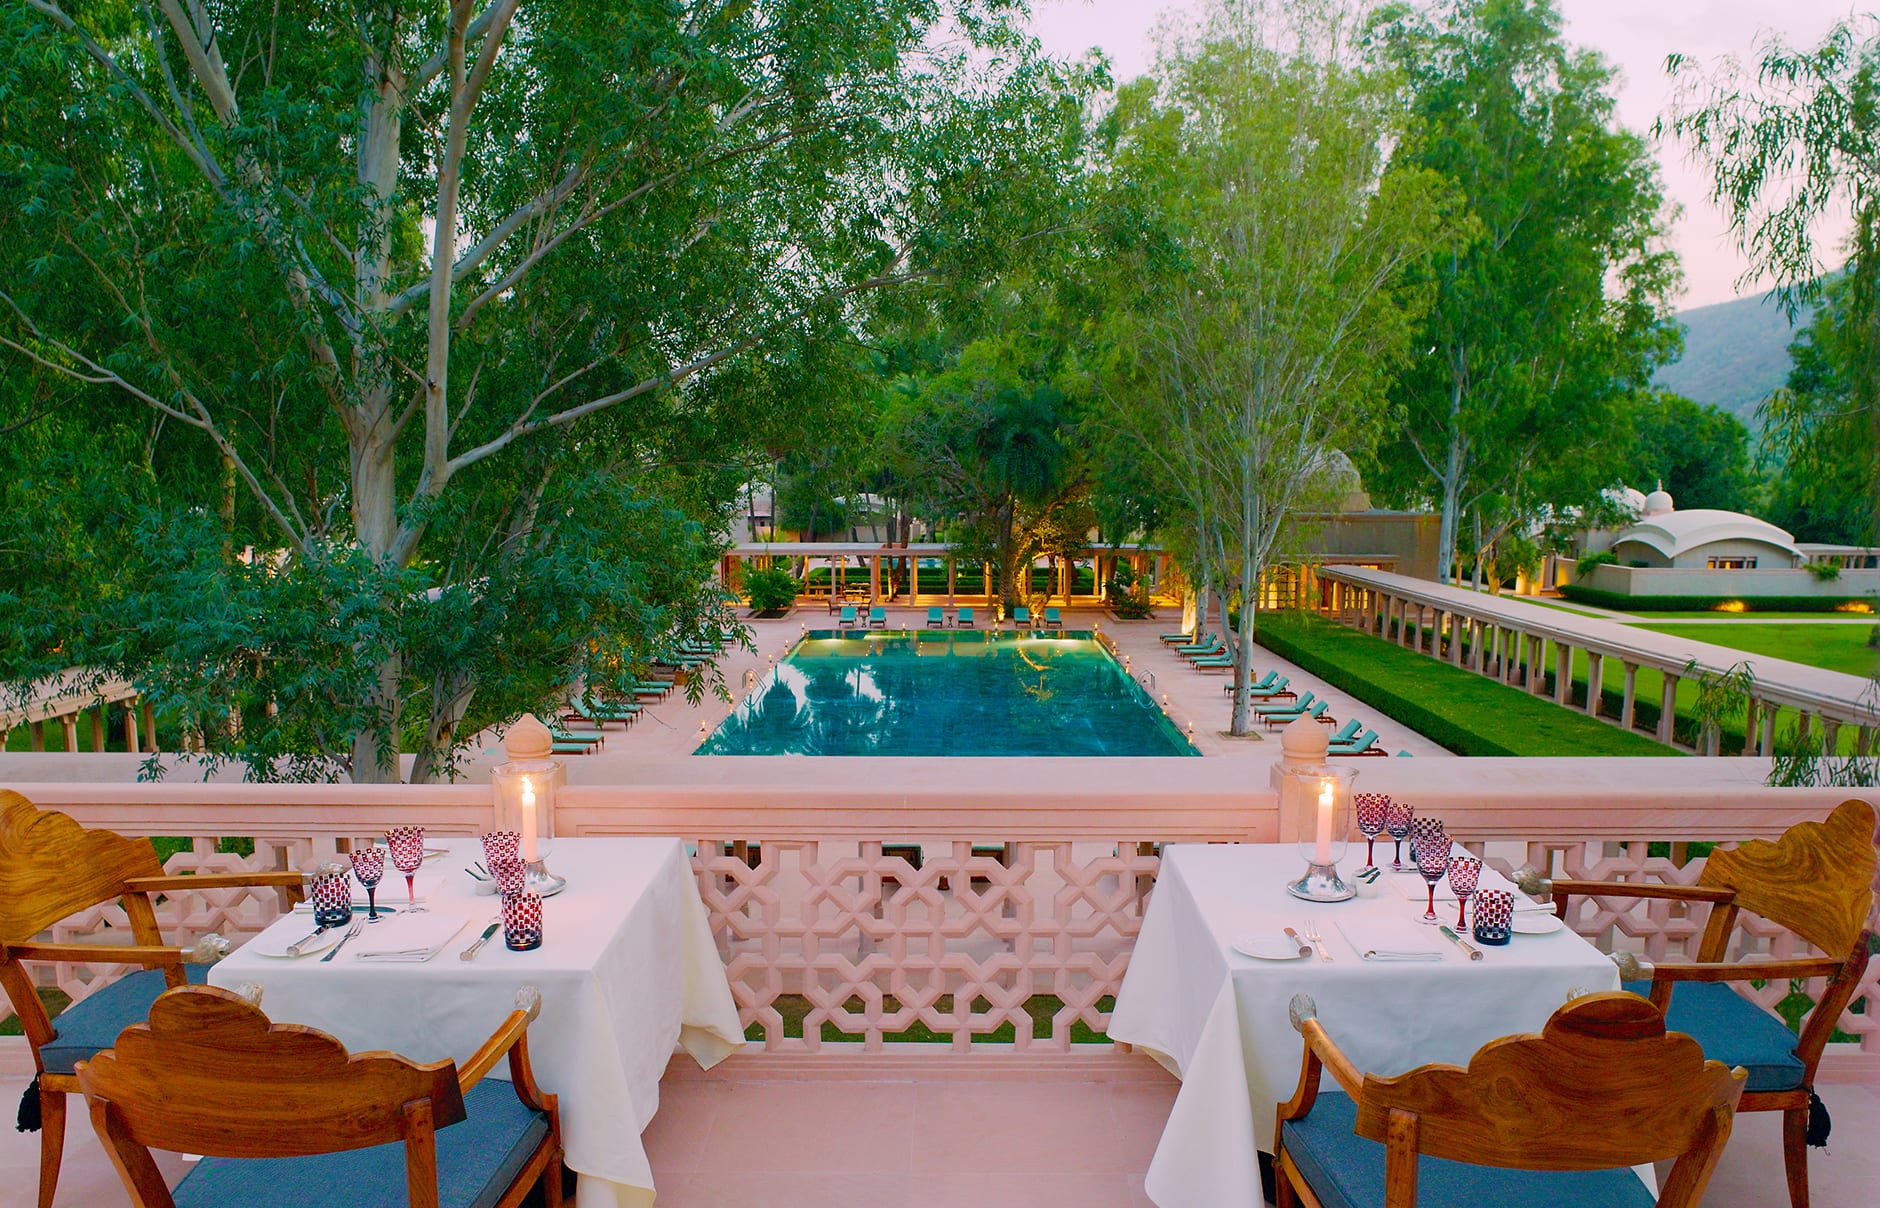 Roof Terrace Dining. Amanbagh, Alwar, Rajasthan, India. Luxury Hotel Review by TravelPlusStyle. Photo © Aman Resorts